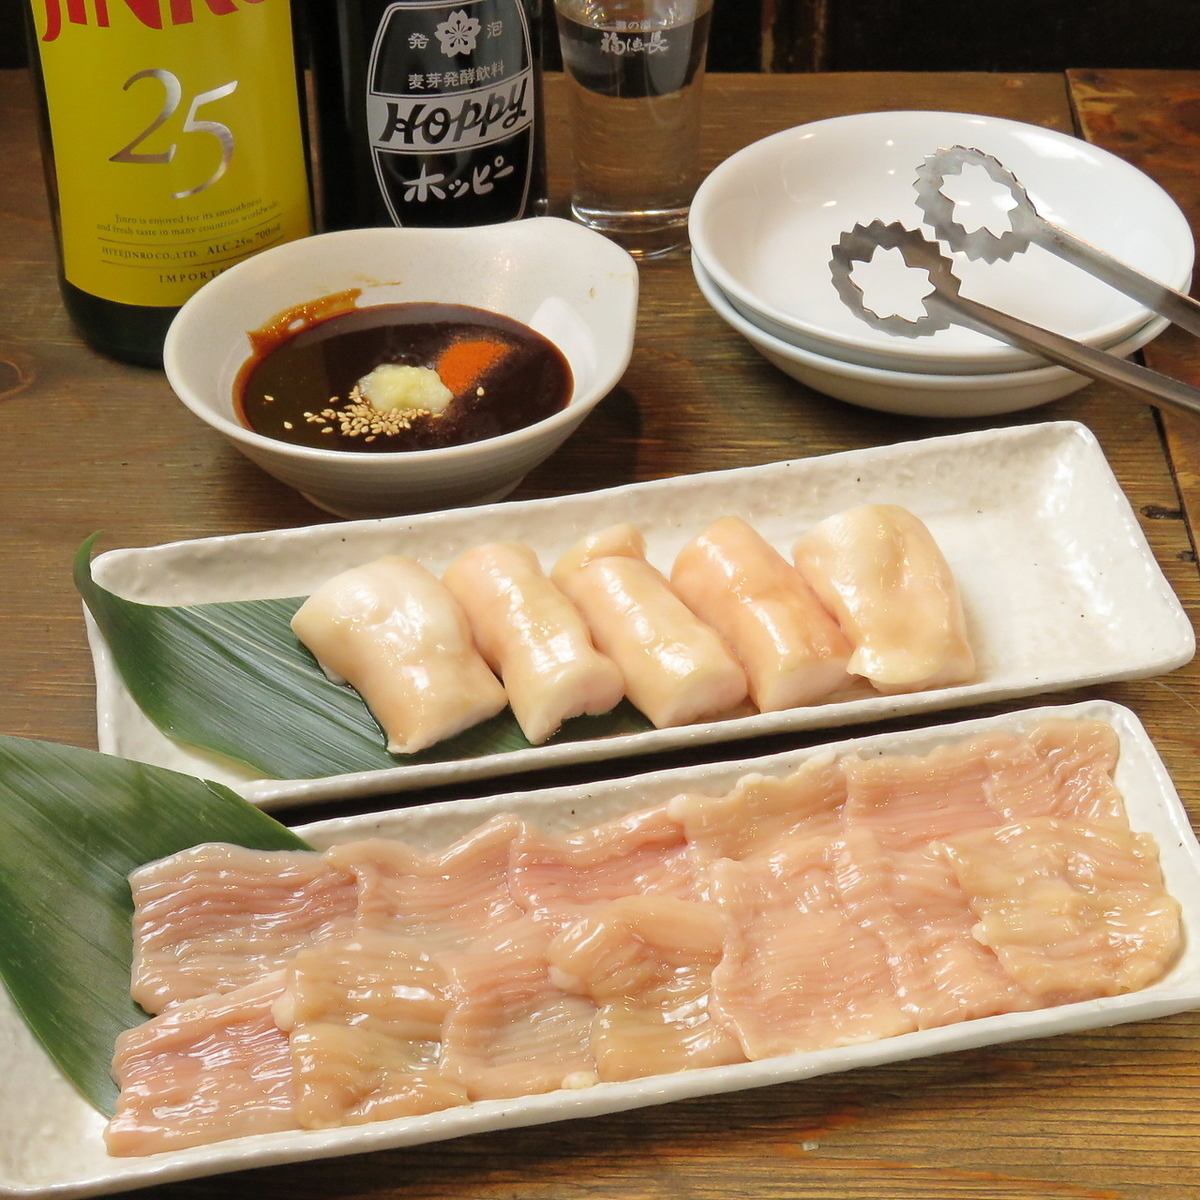 Meat is sent directly from Tokyo Meat Market on the day ★ Fresh and delicious meat is available